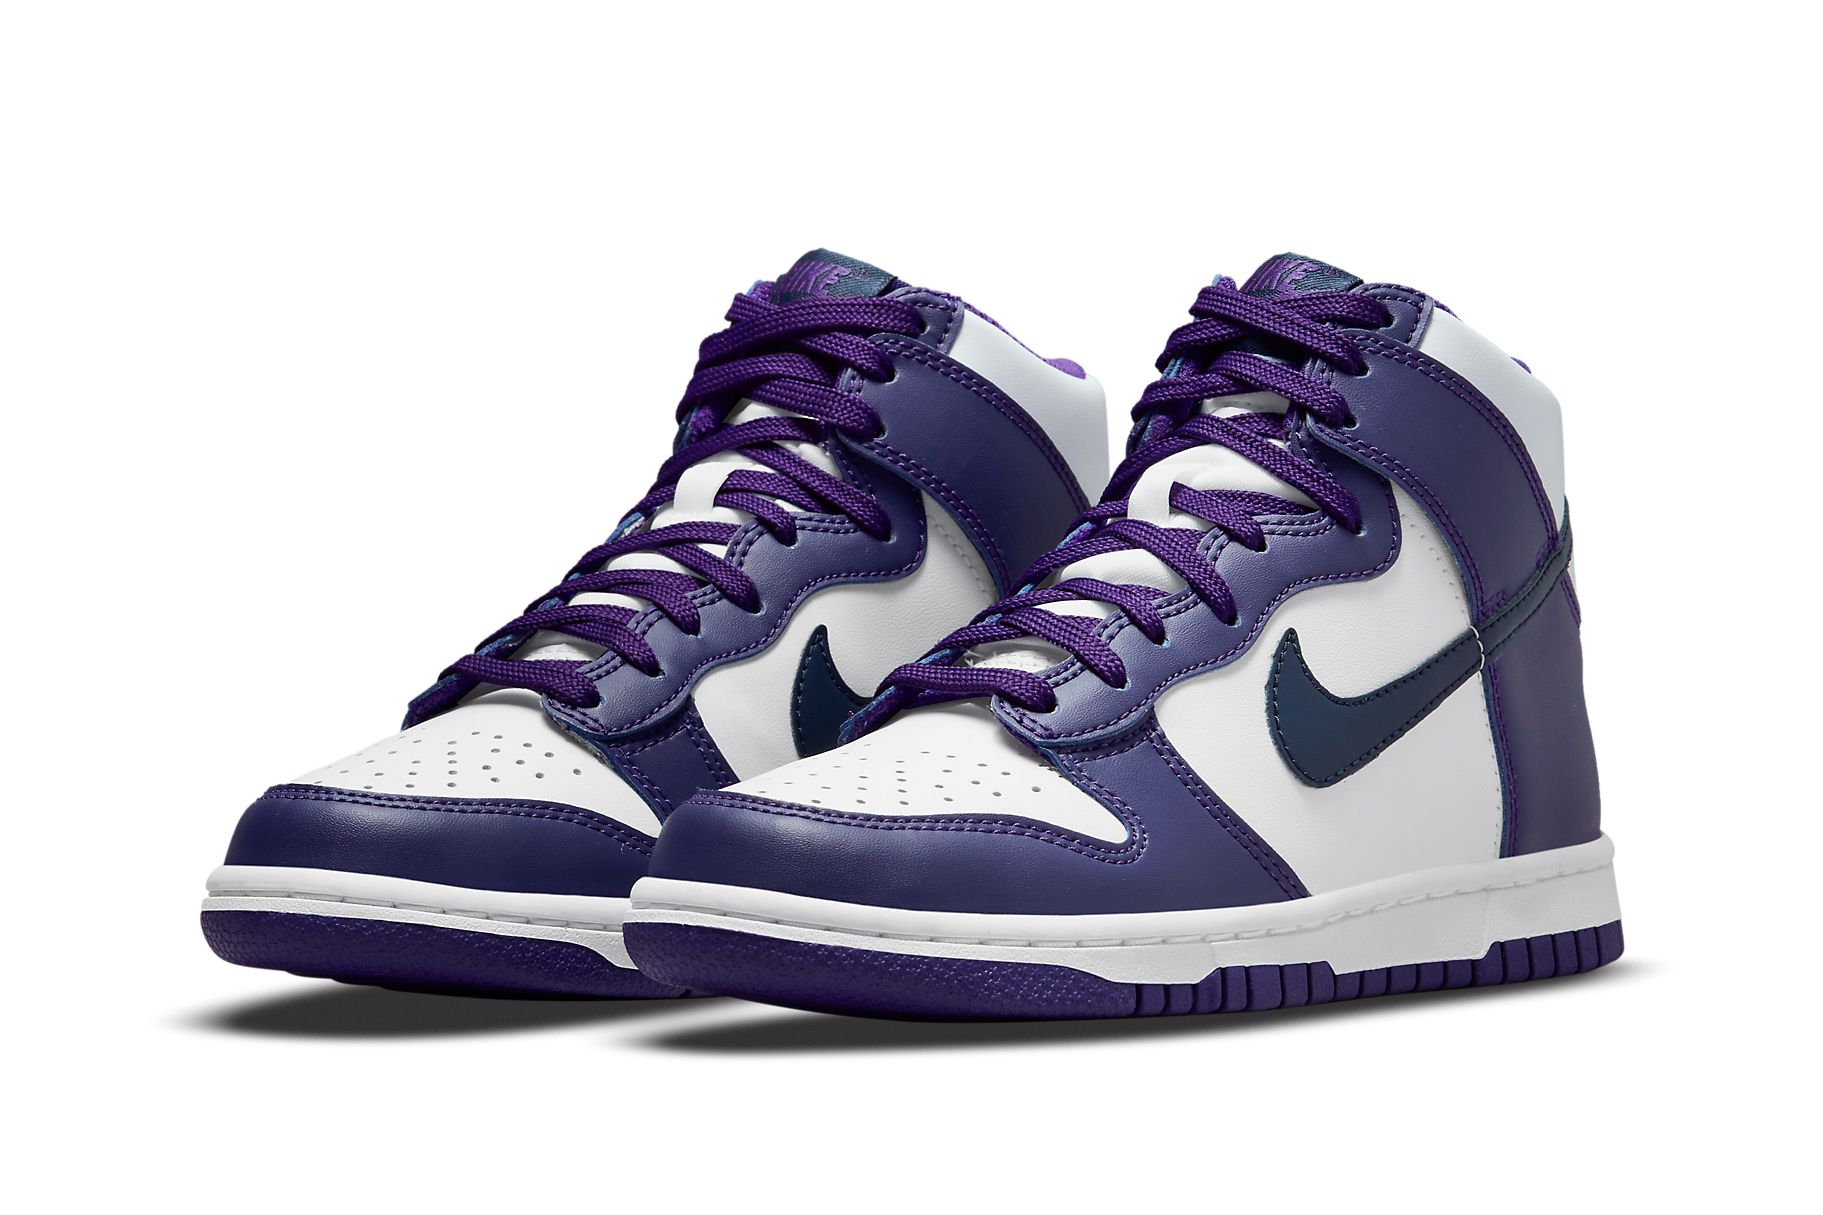 Navy Courts Purple on this Nike Dunk High